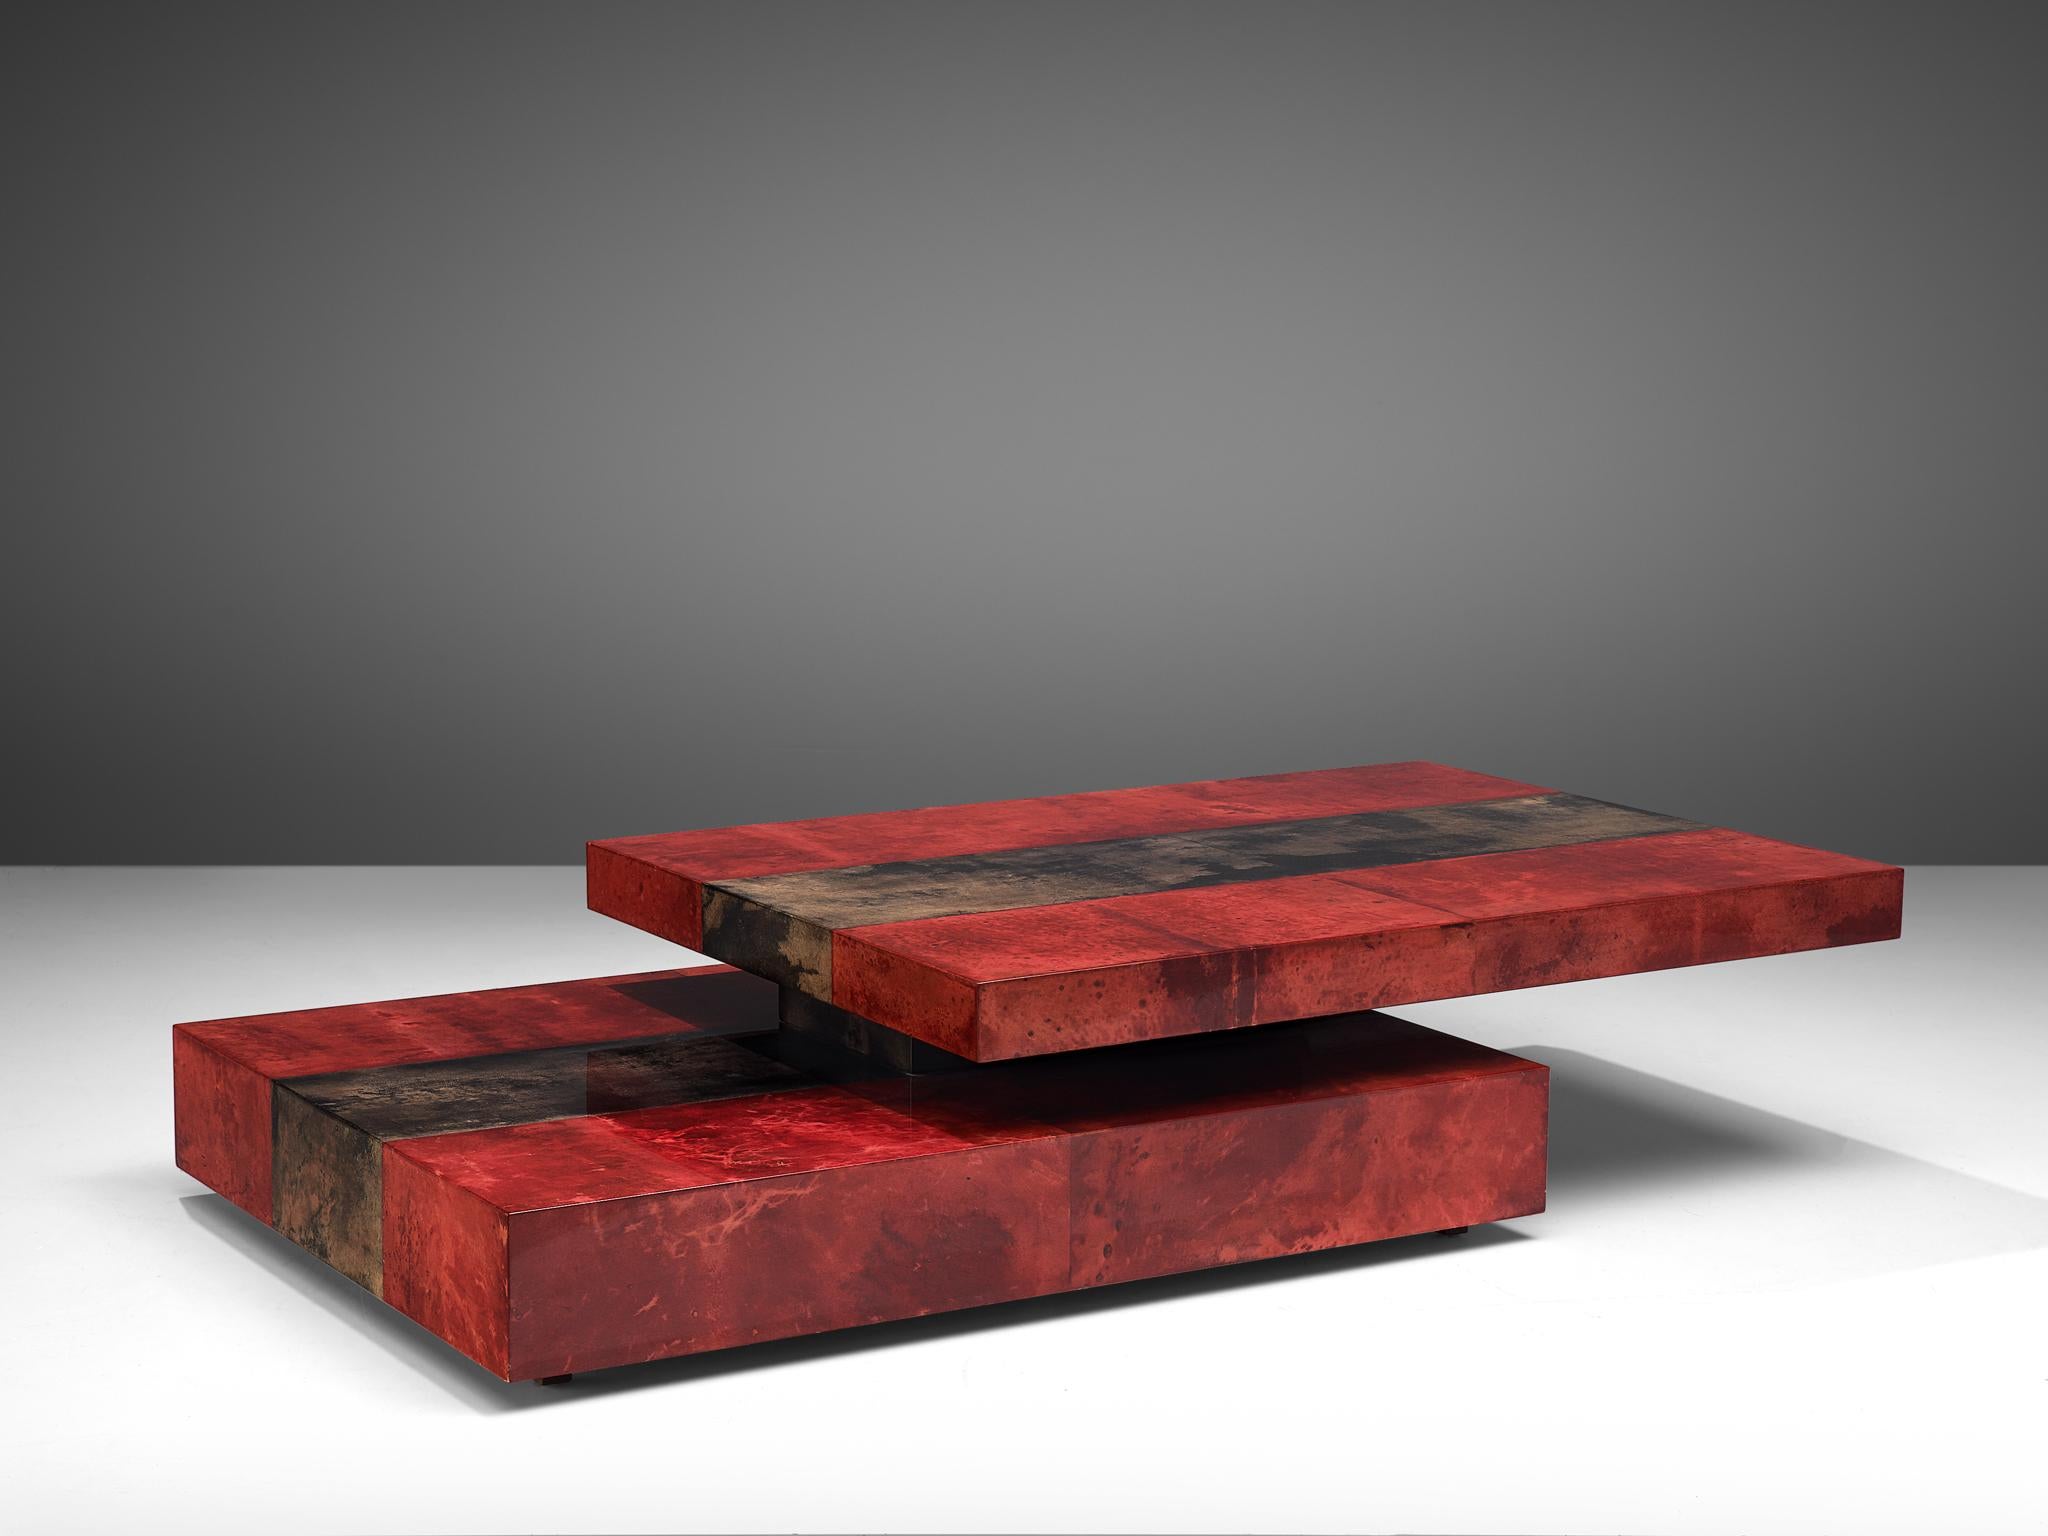 Aldo Tura, cocktail table, wooden and parchment, Italy, 1970s

This coffee table is by Italian designer and maker, Aldo Tura. Wrapped in dark red and dark brown parchment with deep marbled veining and a high gloss lacquered finish. The top can be